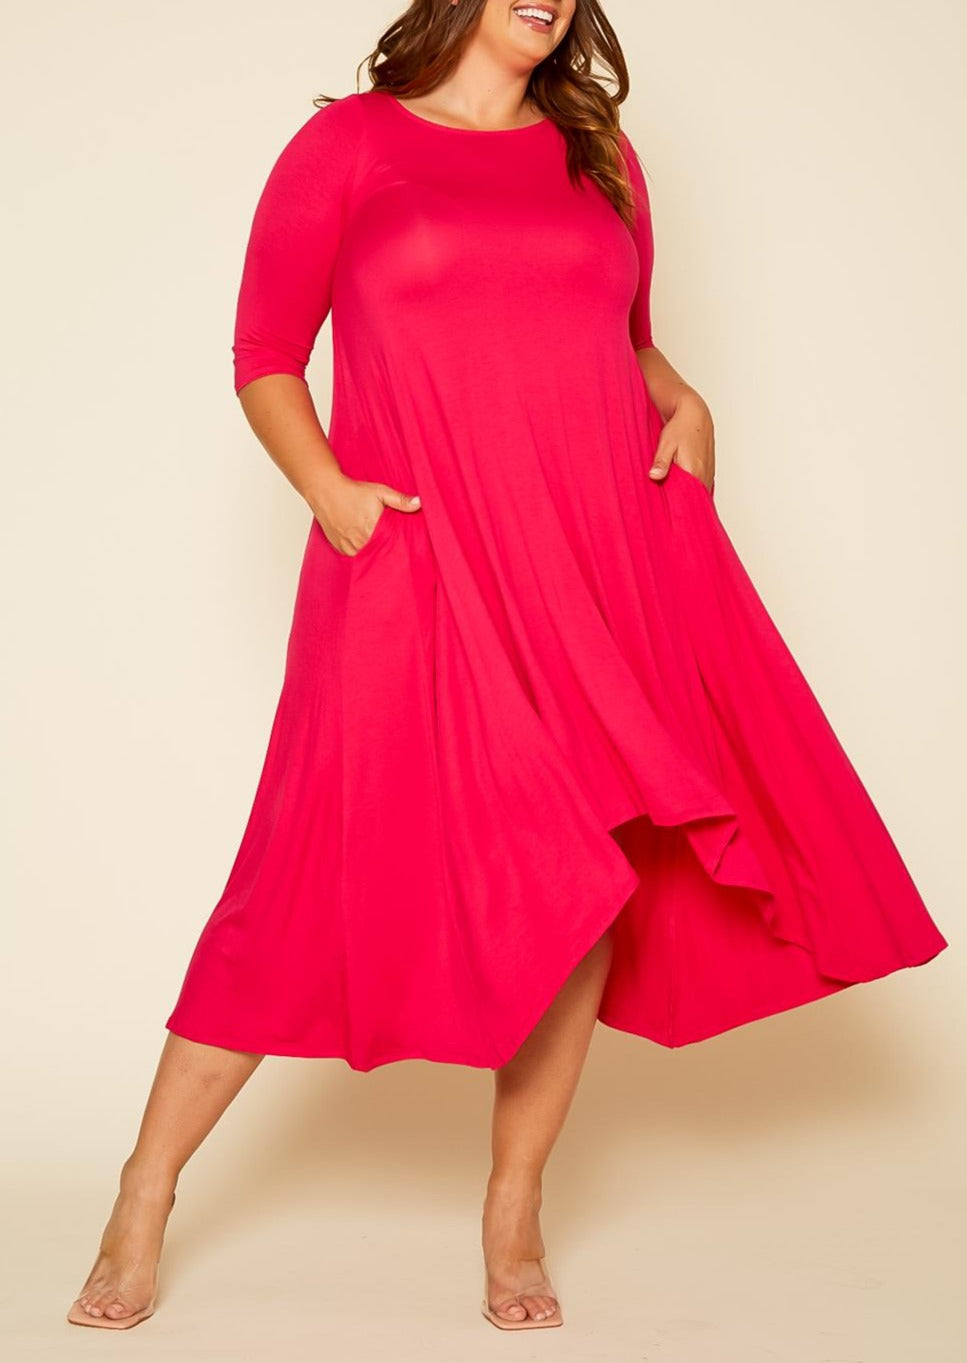 HI Curvy Plus Size Women Relaxed Style Crew neck Dress made in USA